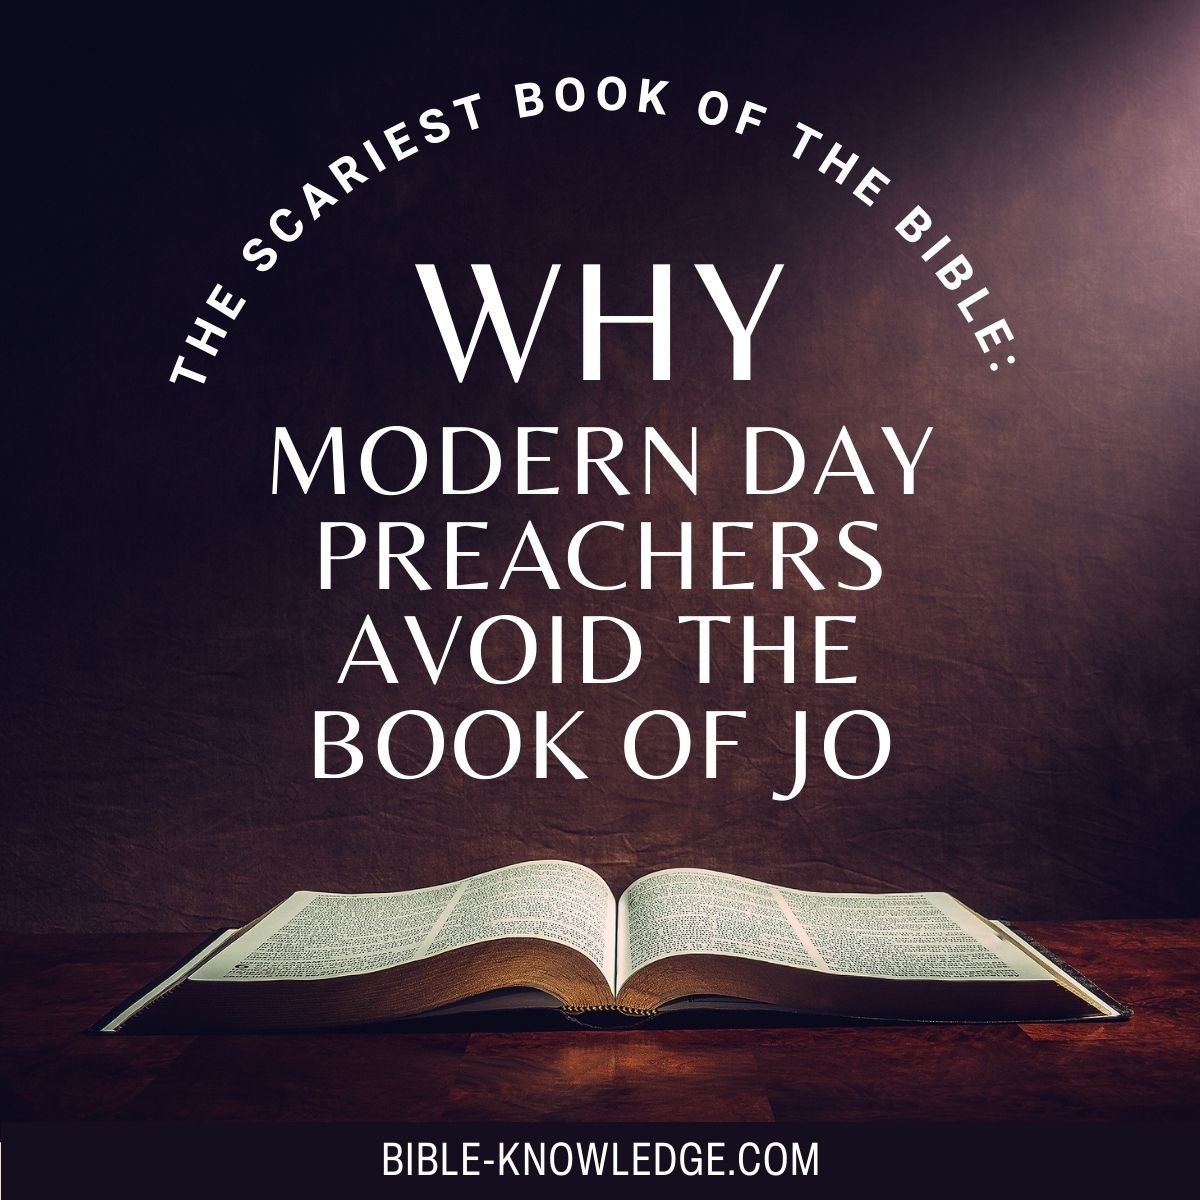 Why Modern Day Preachers Avoid the Book of Jo